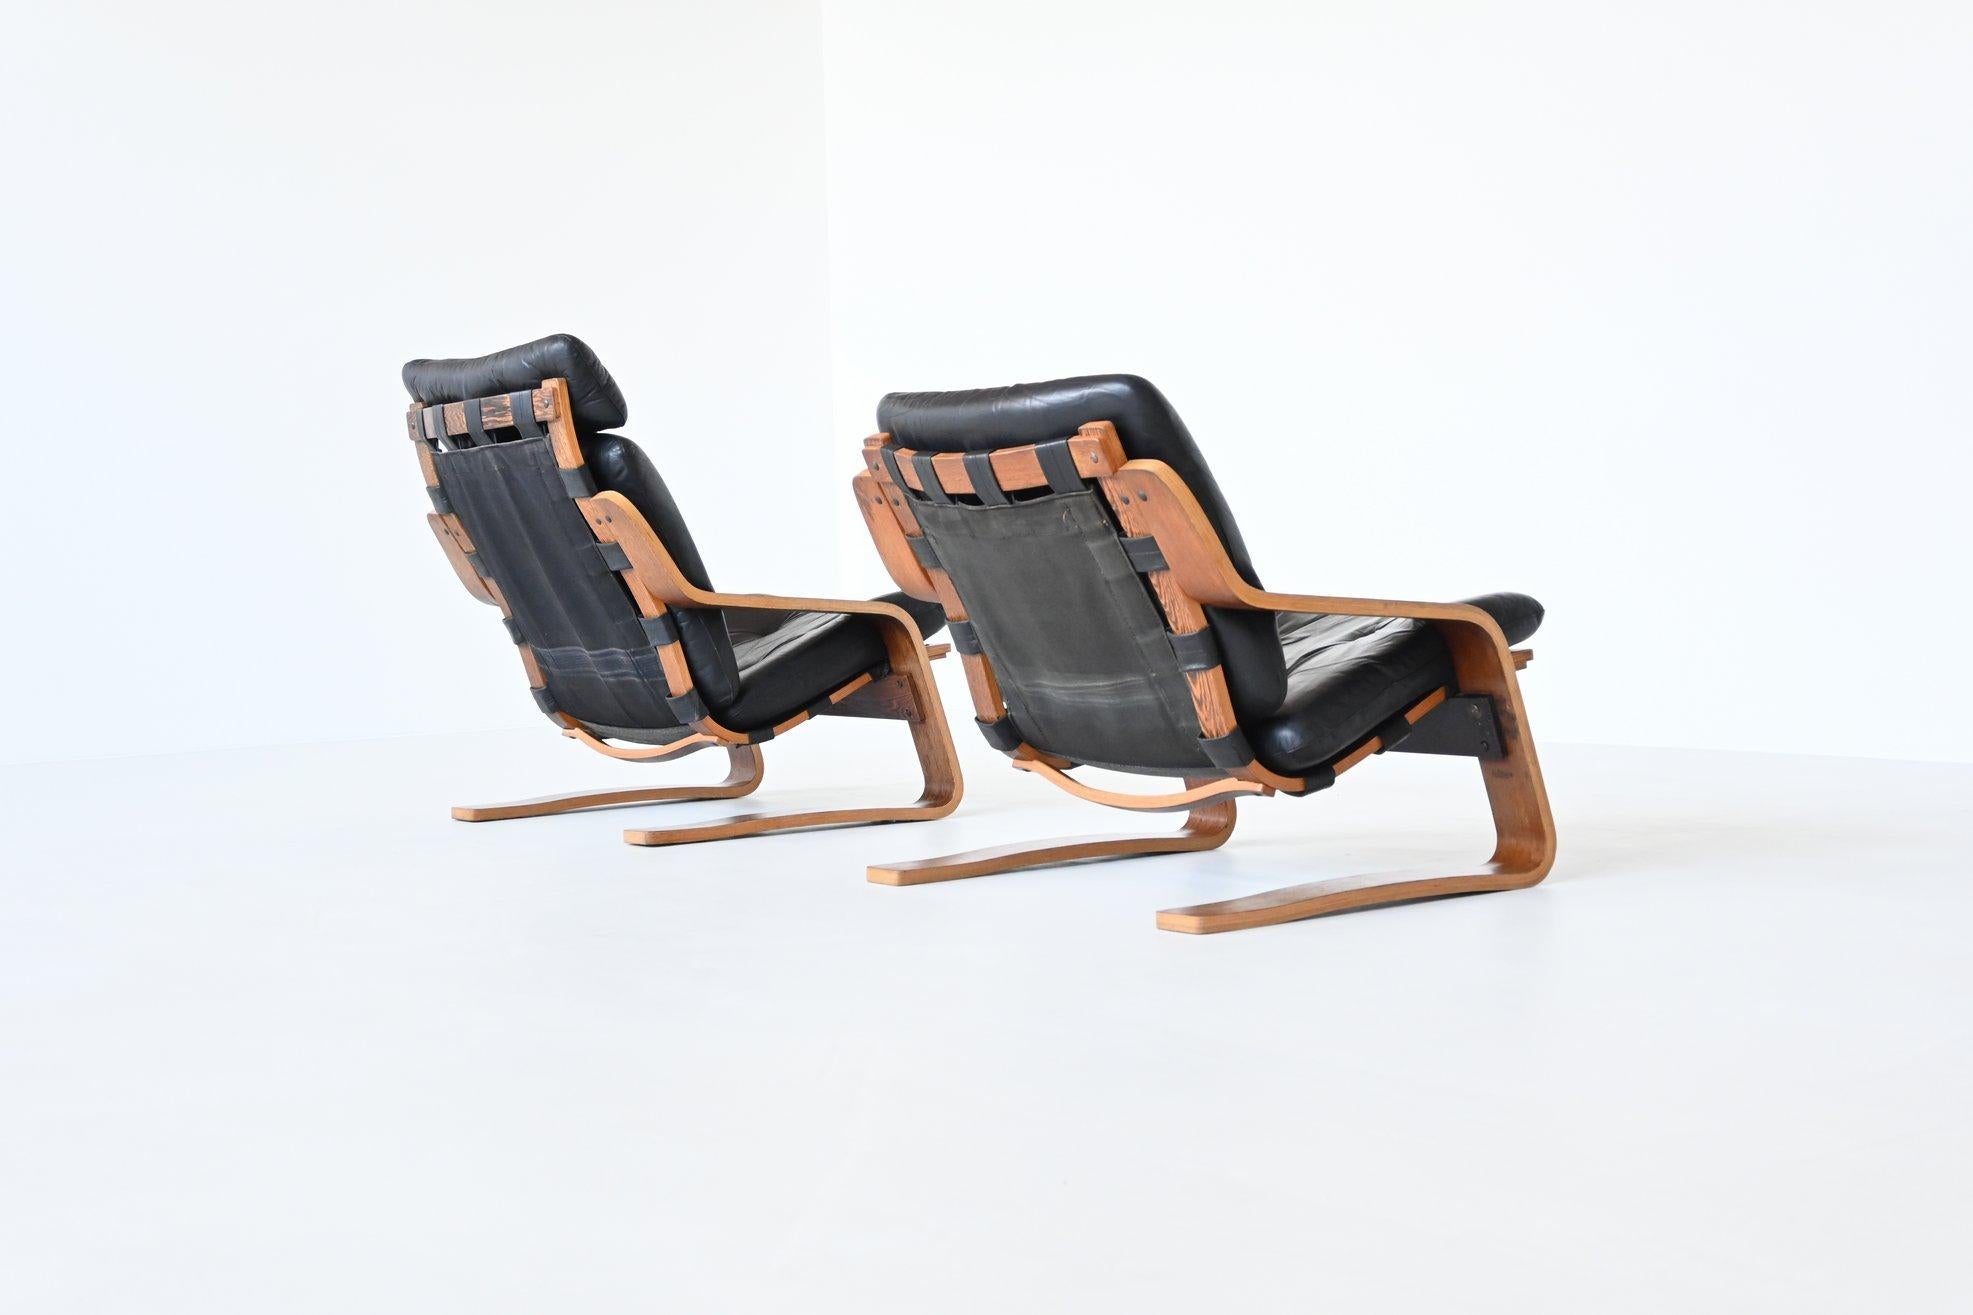 Leather Scandinavian Wenge Plywood Pair of Lounge Chairs, Norway, 1970